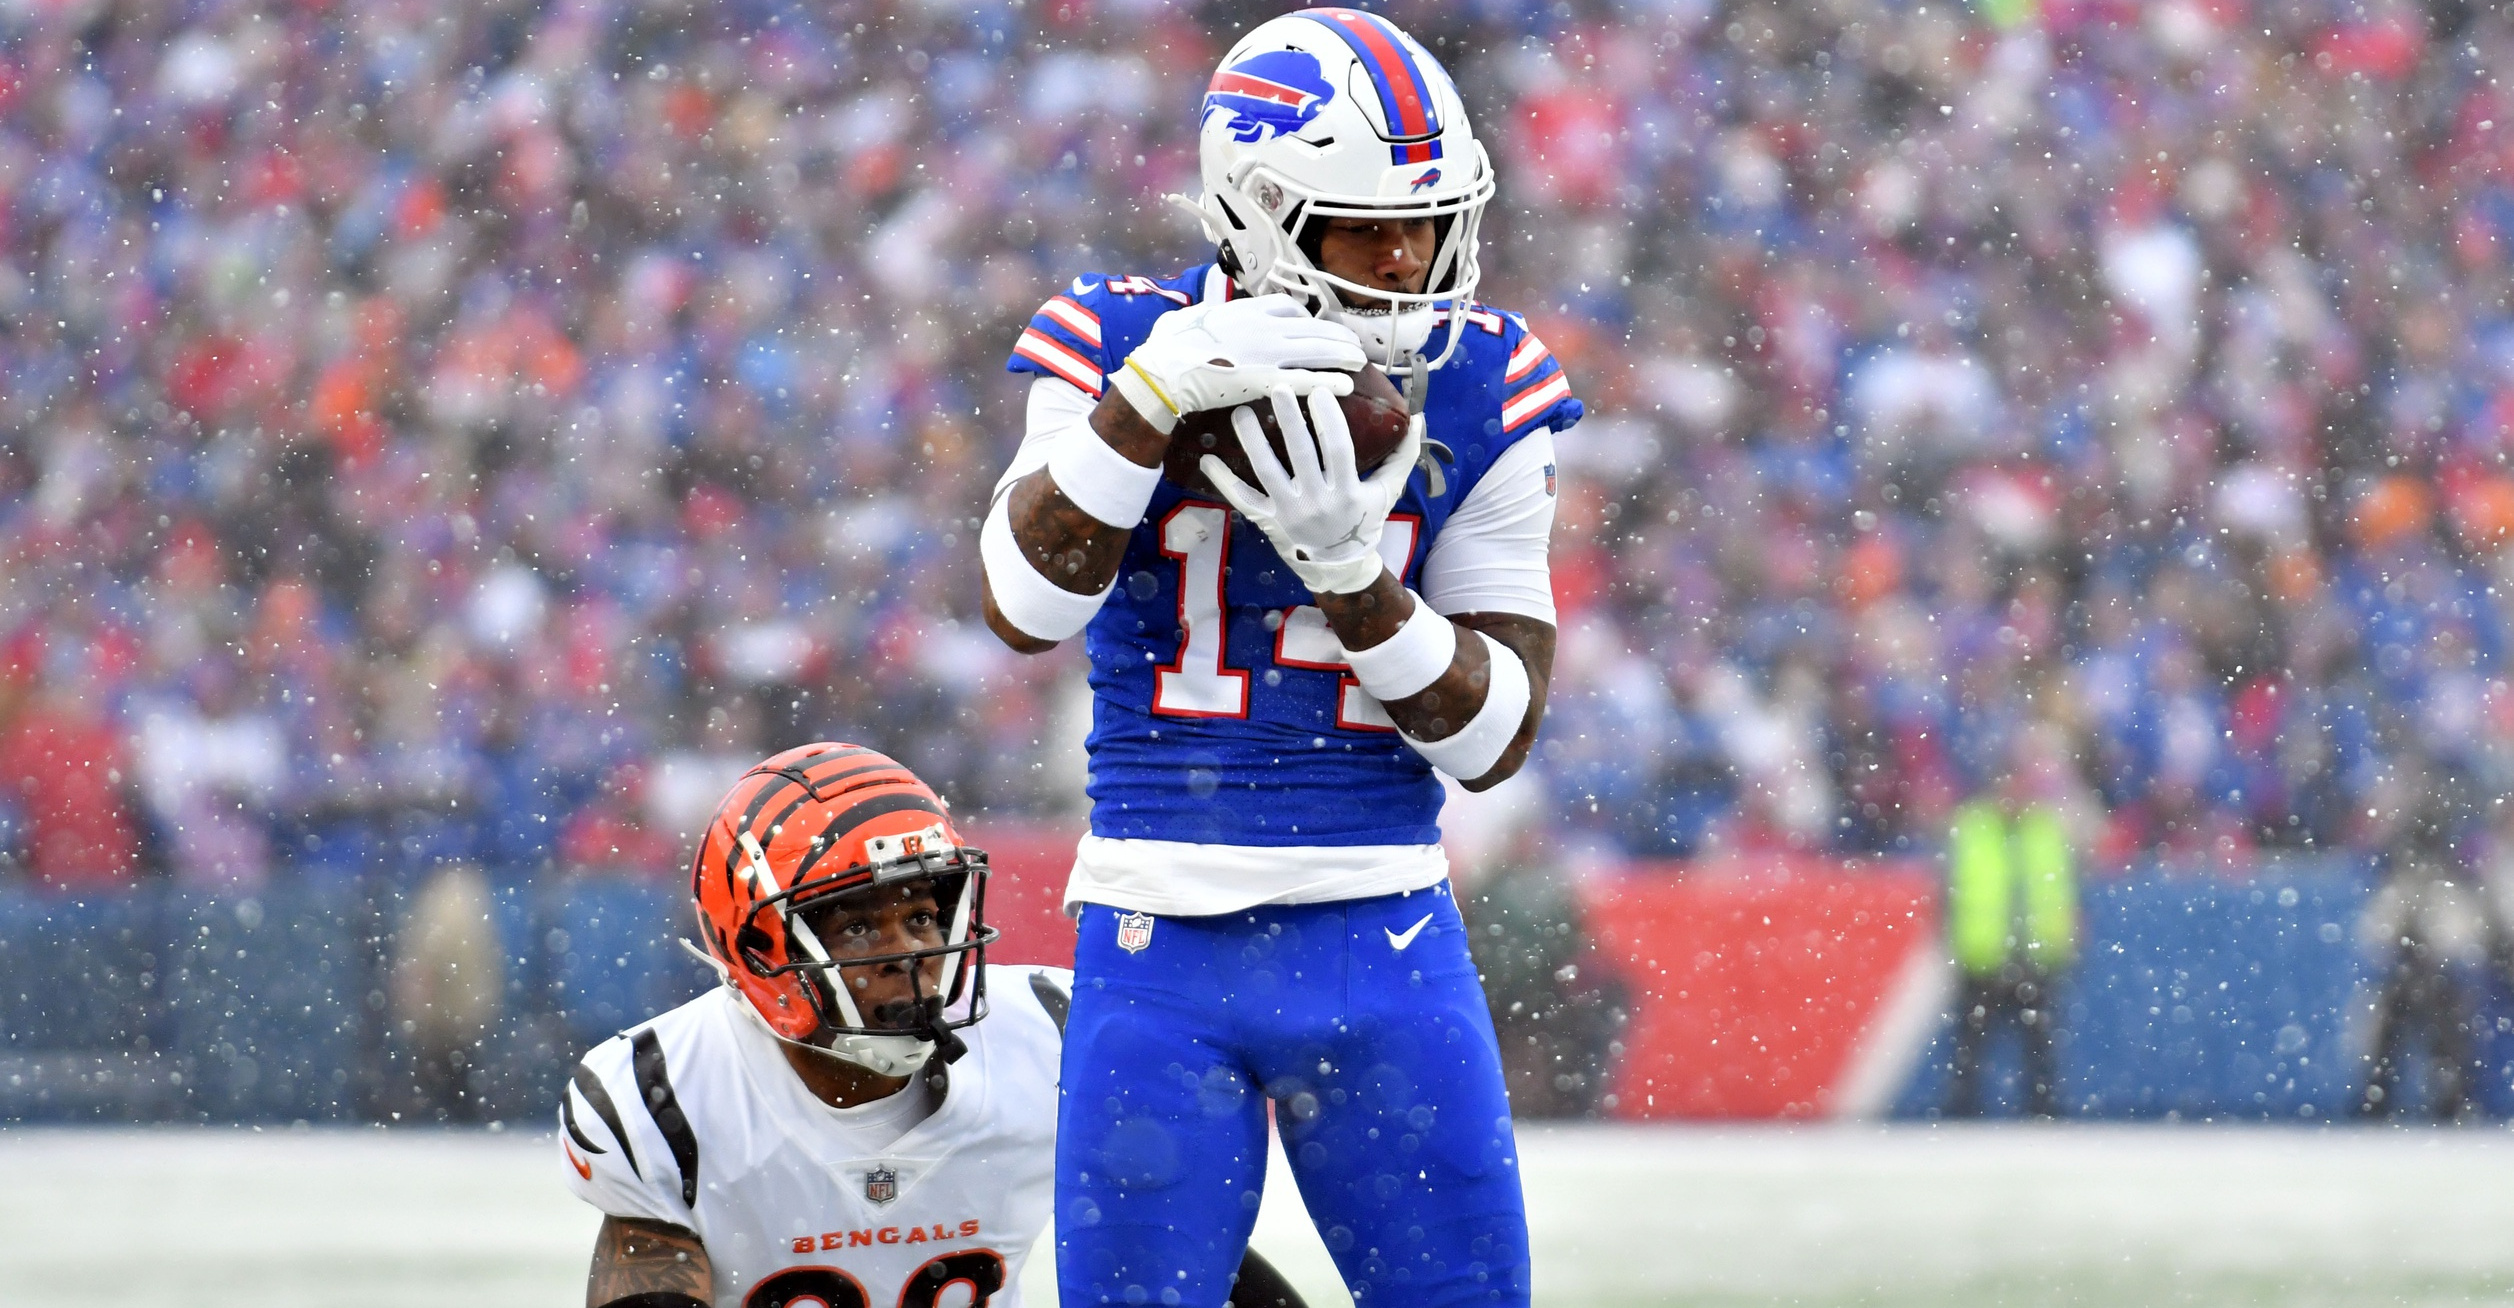 Stefon Diggs makes a catch for the Bills against the Bengals' Cam Taylor-Britt.